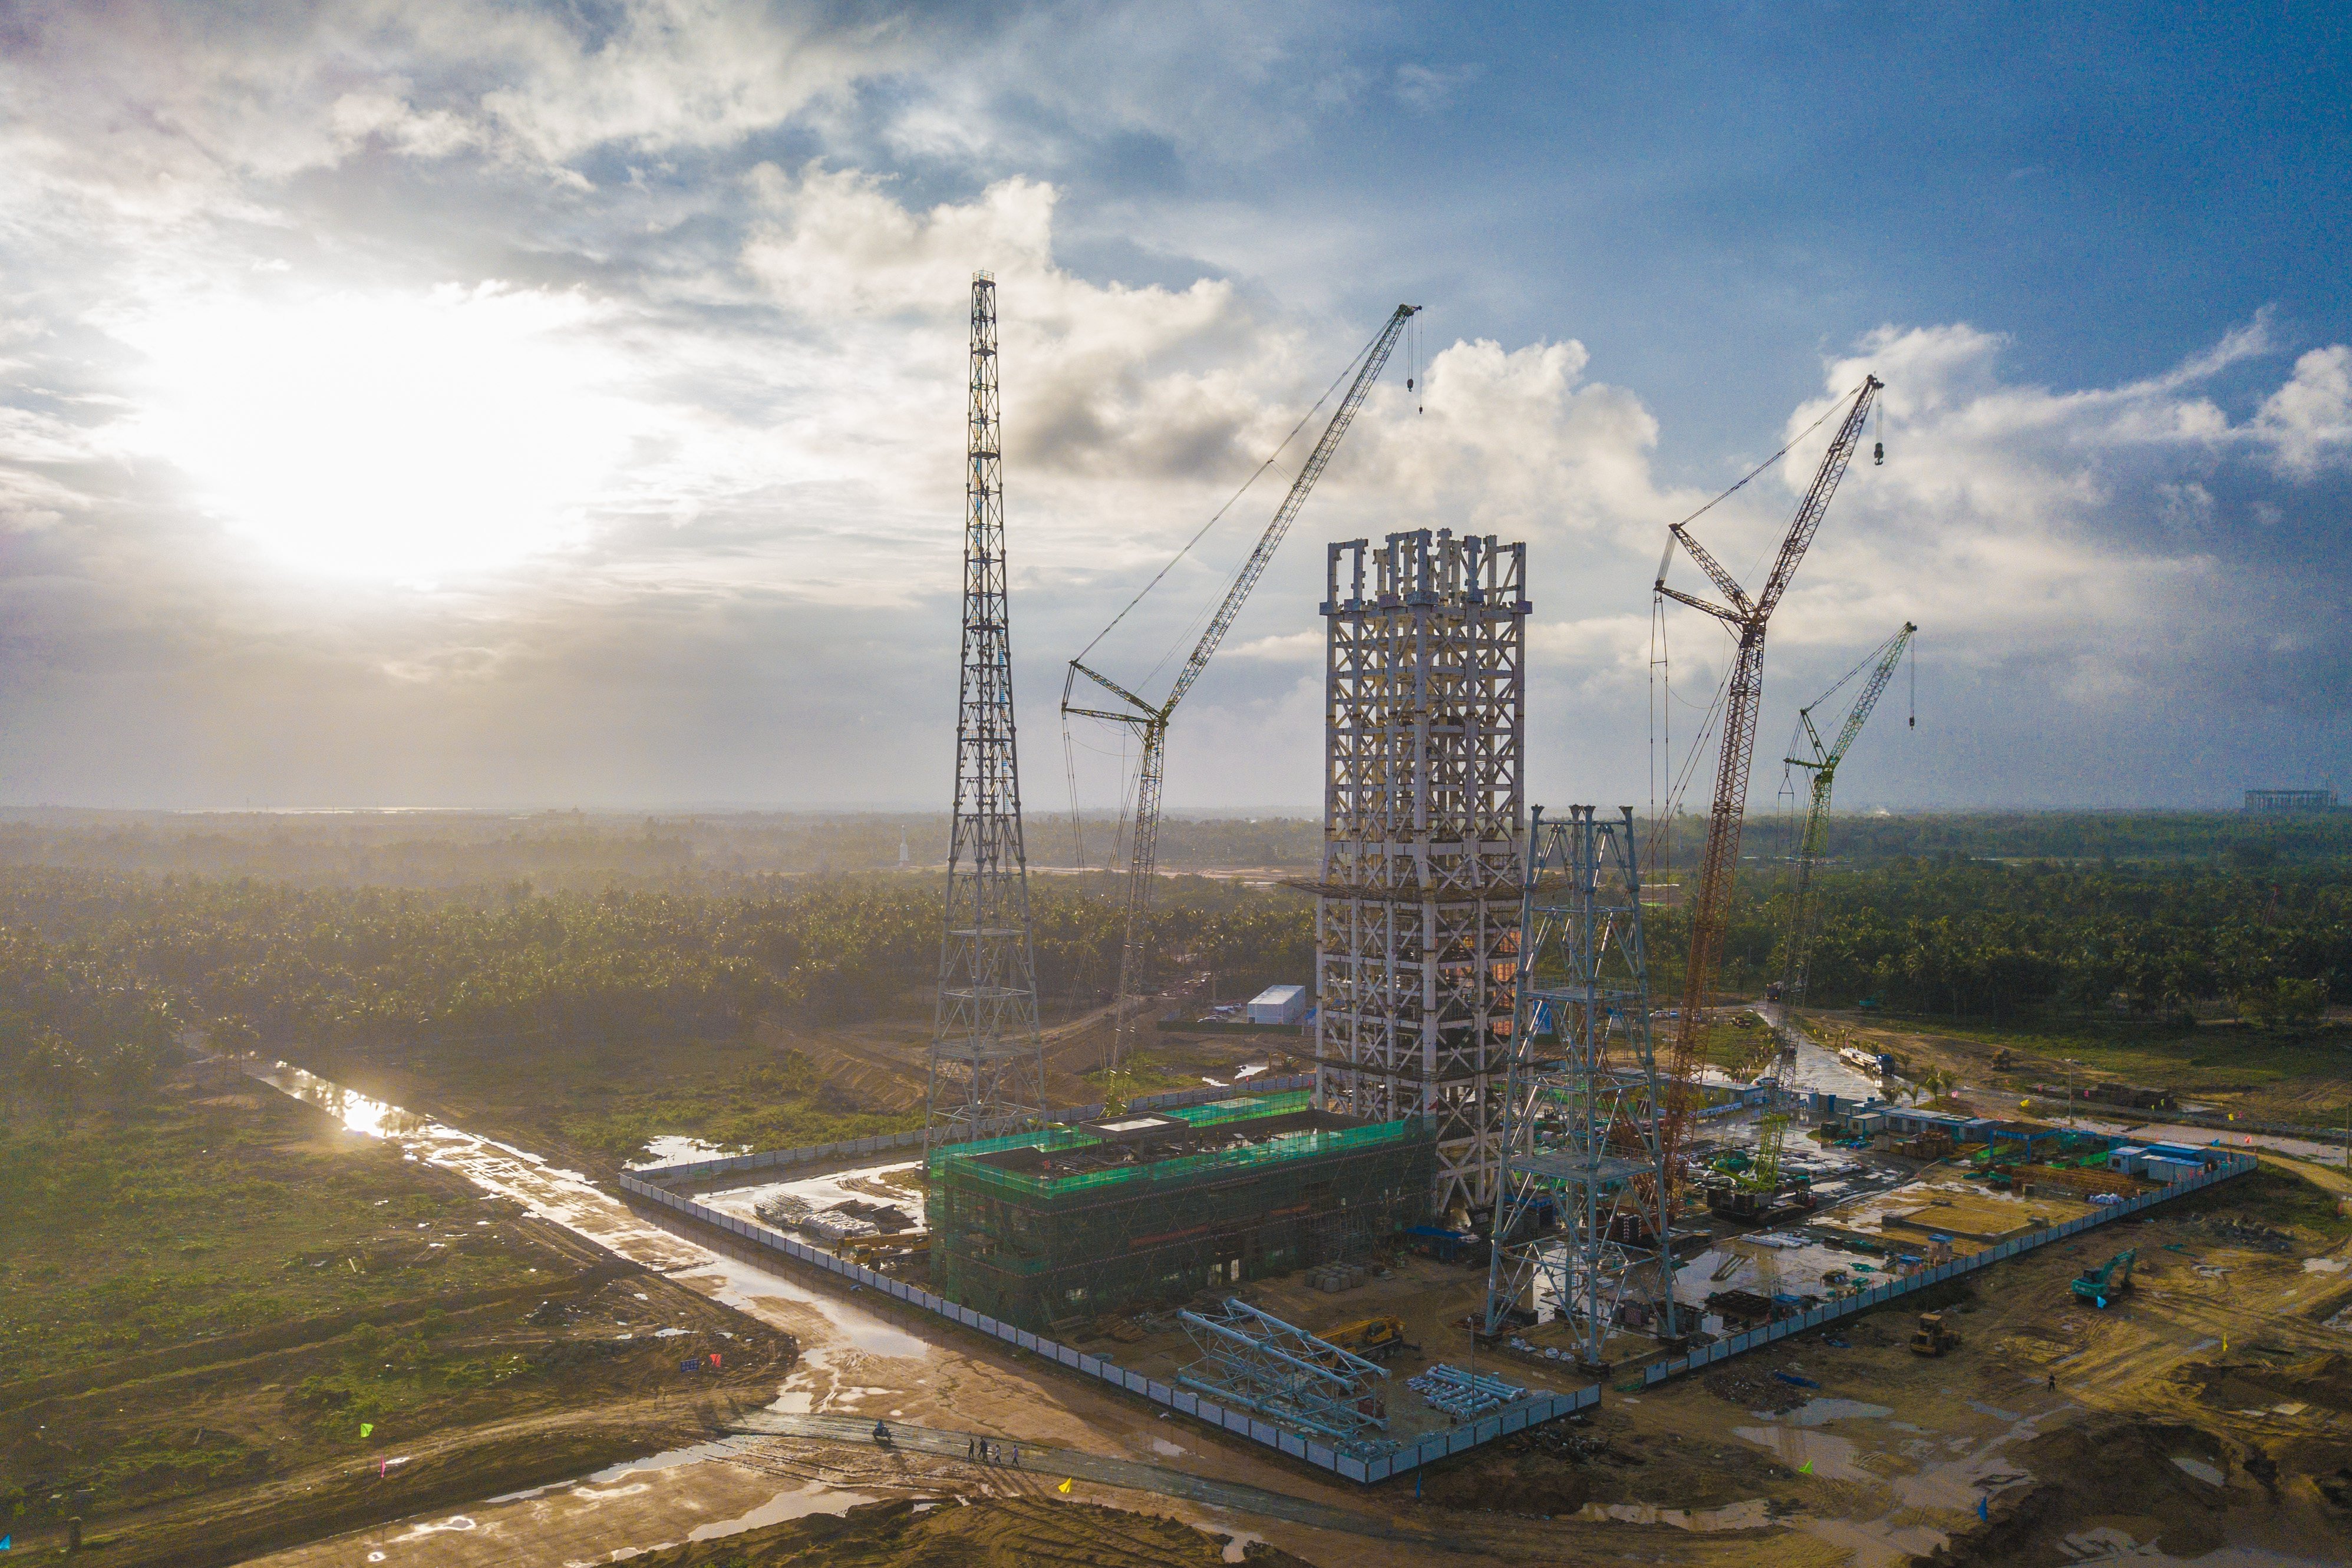 “One floor every 10 days”: an aerial photo taken this month shows construction at the commercial spacecraft launch site in Wenchang, Hainan province. Photo: Xinhua